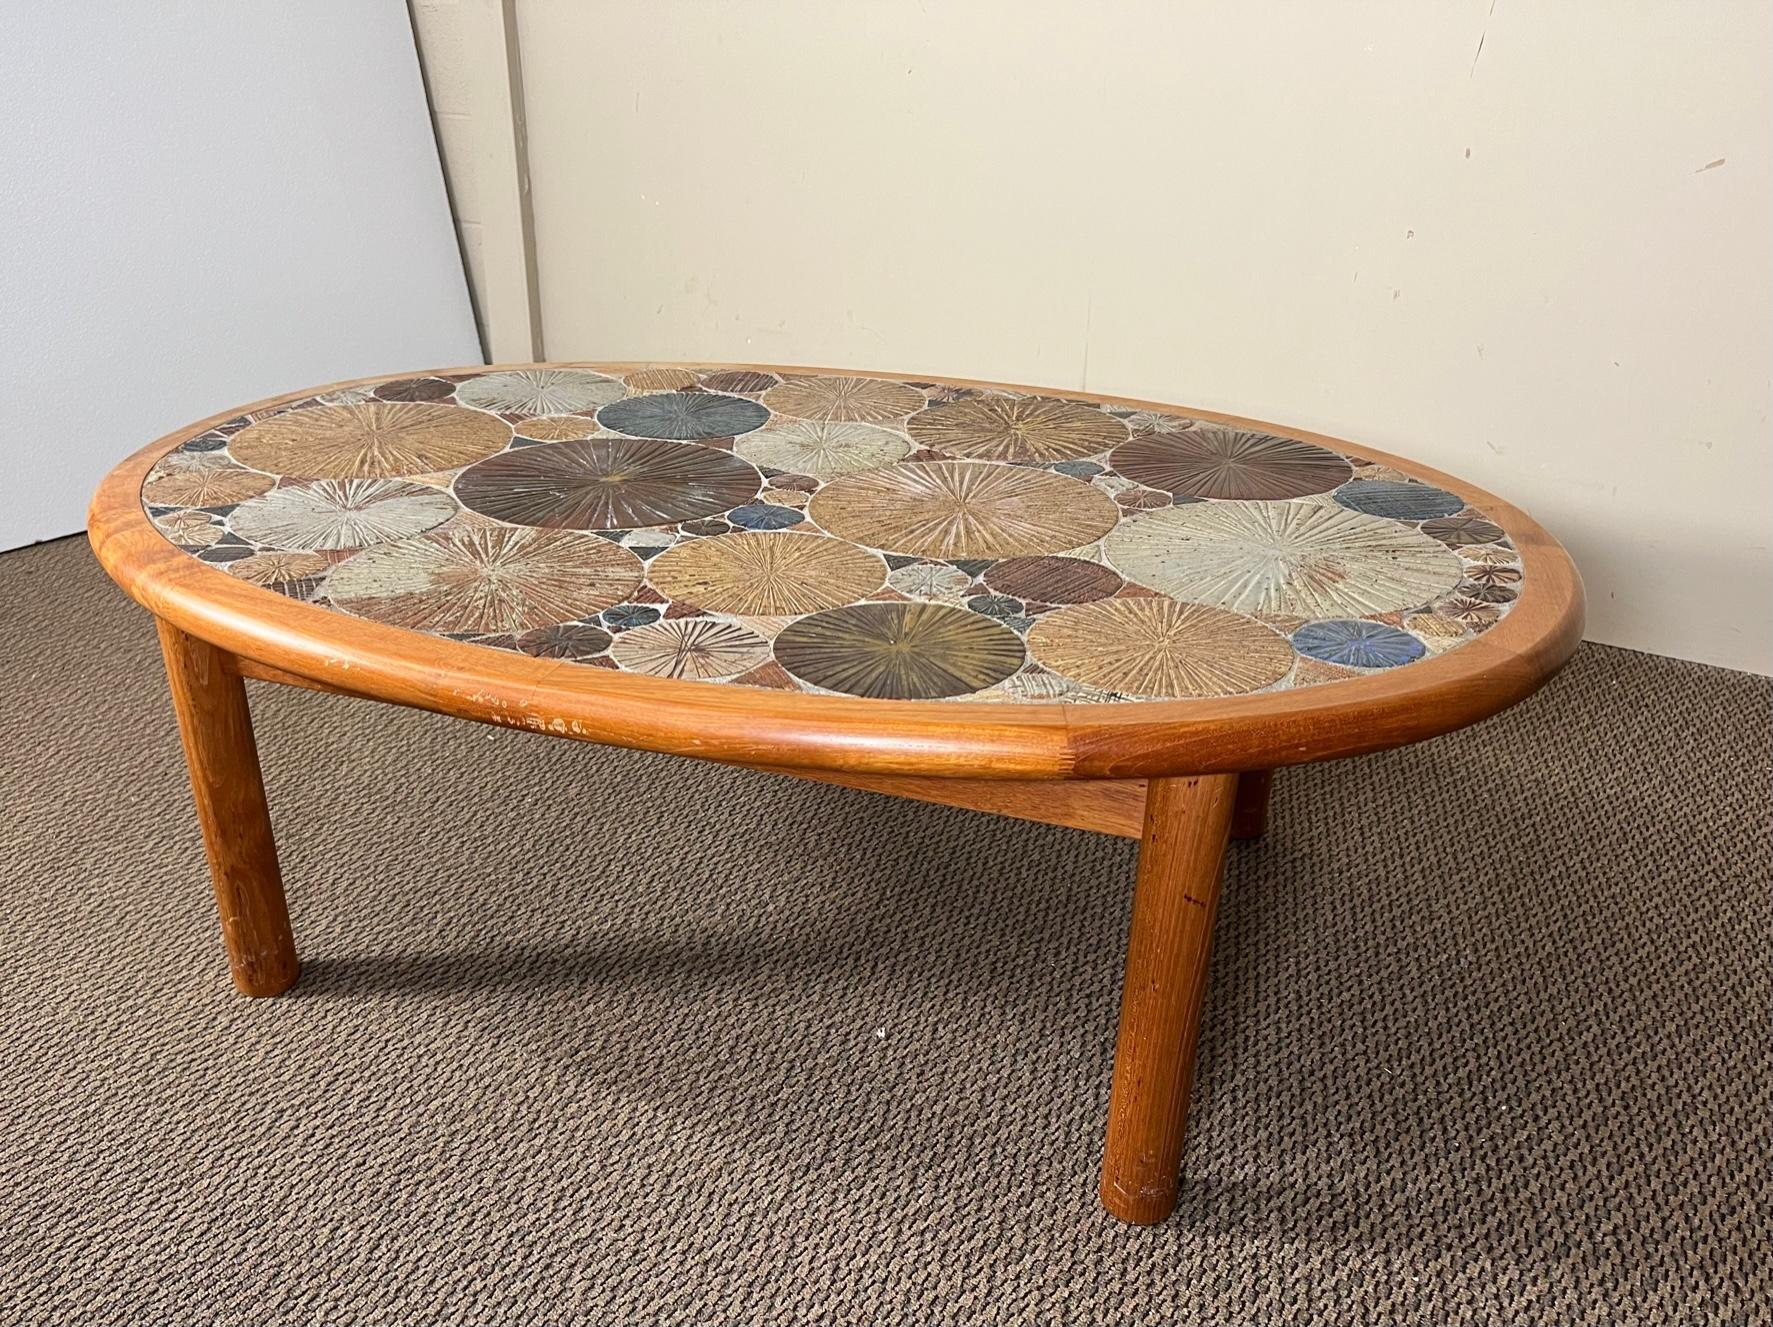 Stunning midcentury teak and tile coffee table. Hand made by Haslev. Made in Denmark. Original label underneath. Designed by Tue Poulsen.

Very nice condition overall. Some marks and stains on the teak frame. Some gouges on the